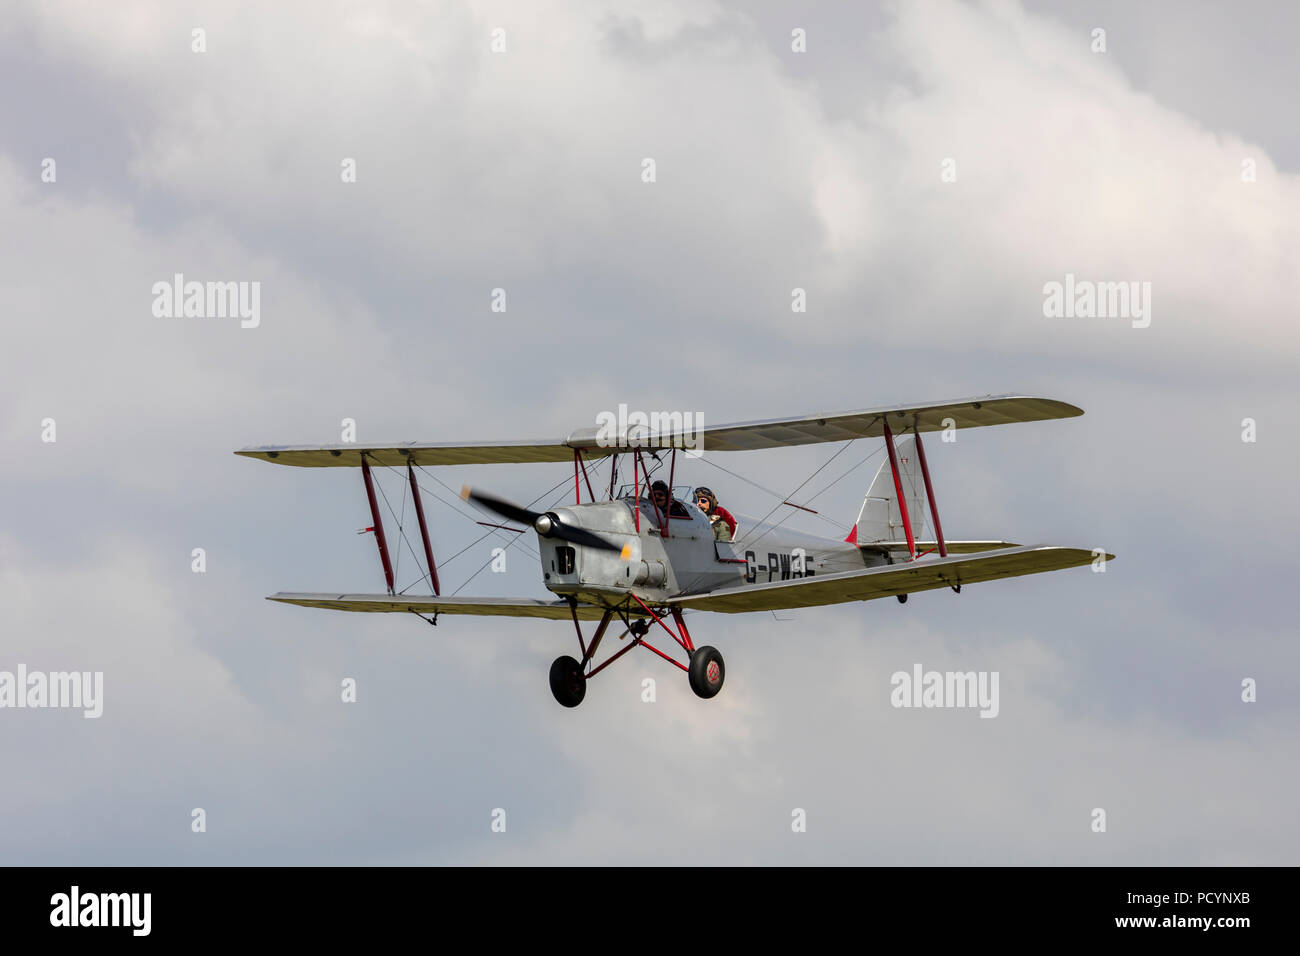 A Tiger Moth G-PWBE in flights and coming into land Stock Photo